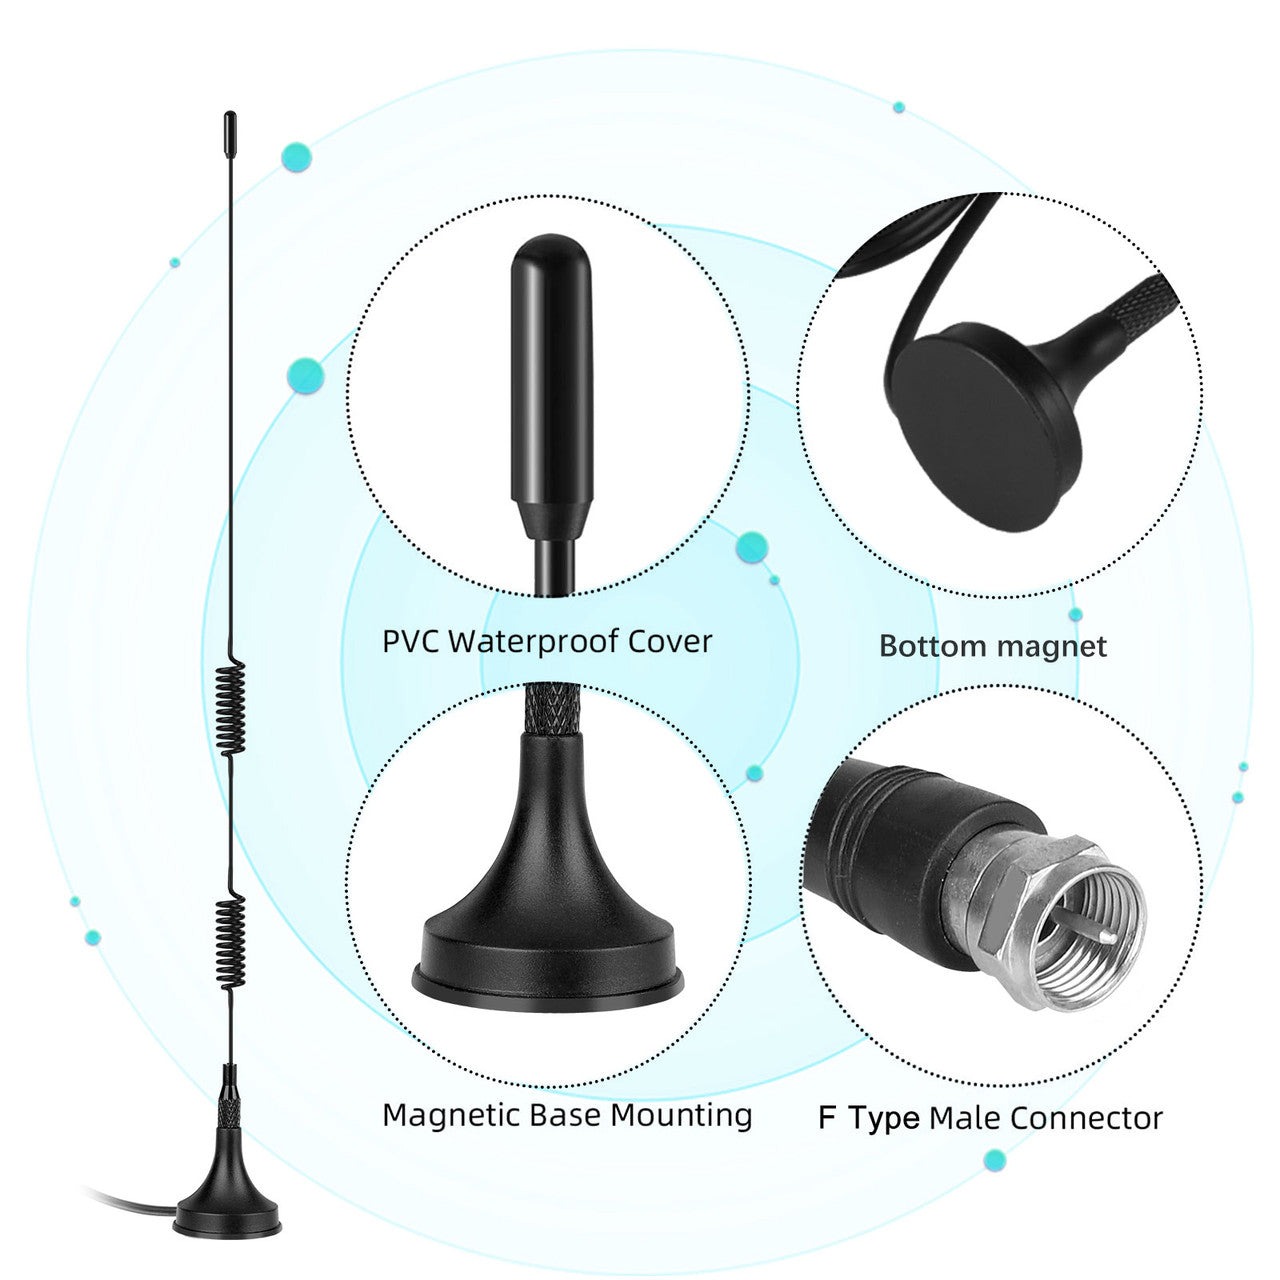 Indoor Digital Radio Antenna for Home, Office, Dormitory, and more.